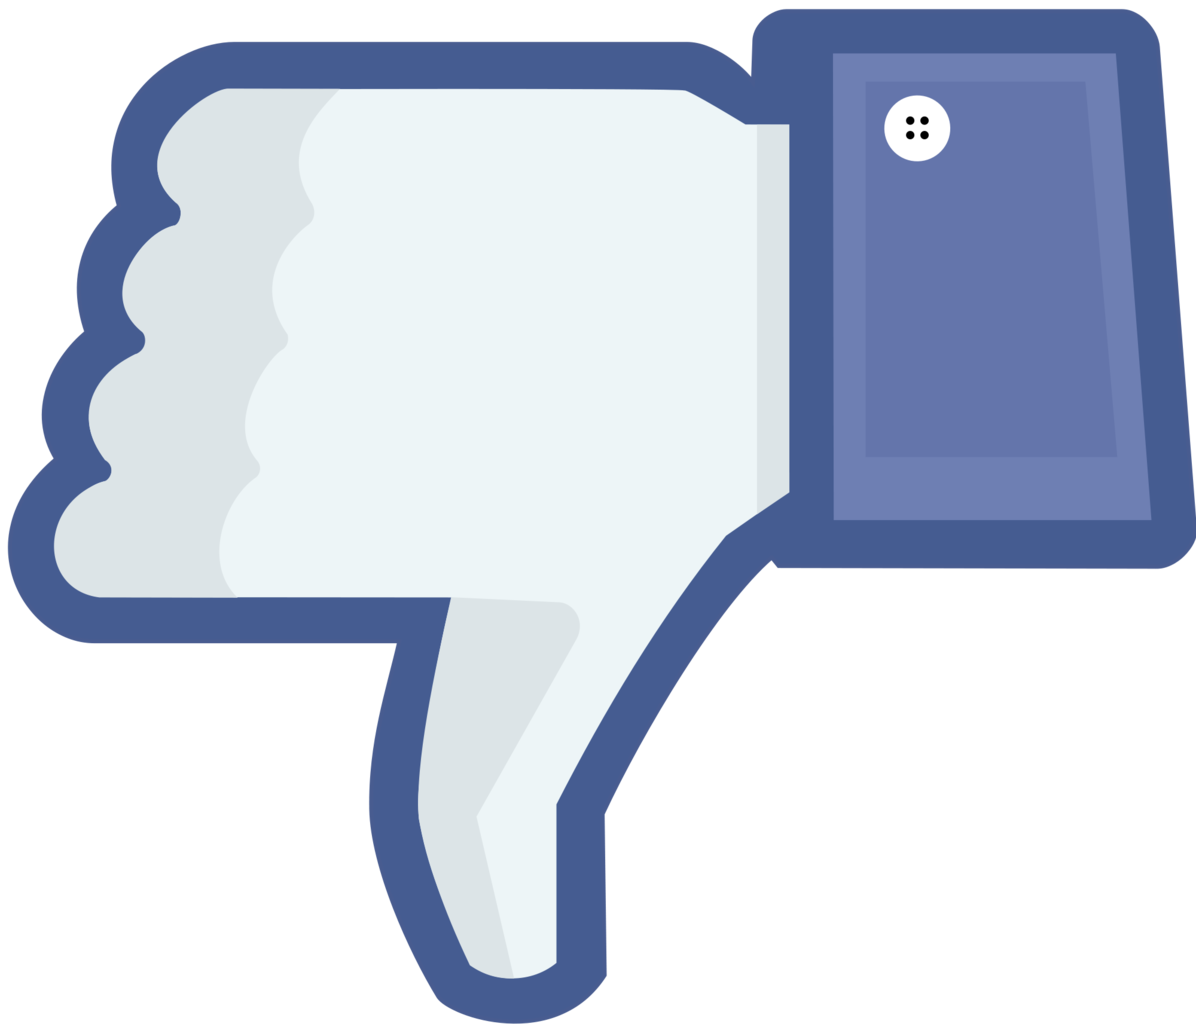 File:Not facebook not like thumbs down.png - Wikimedia Commons